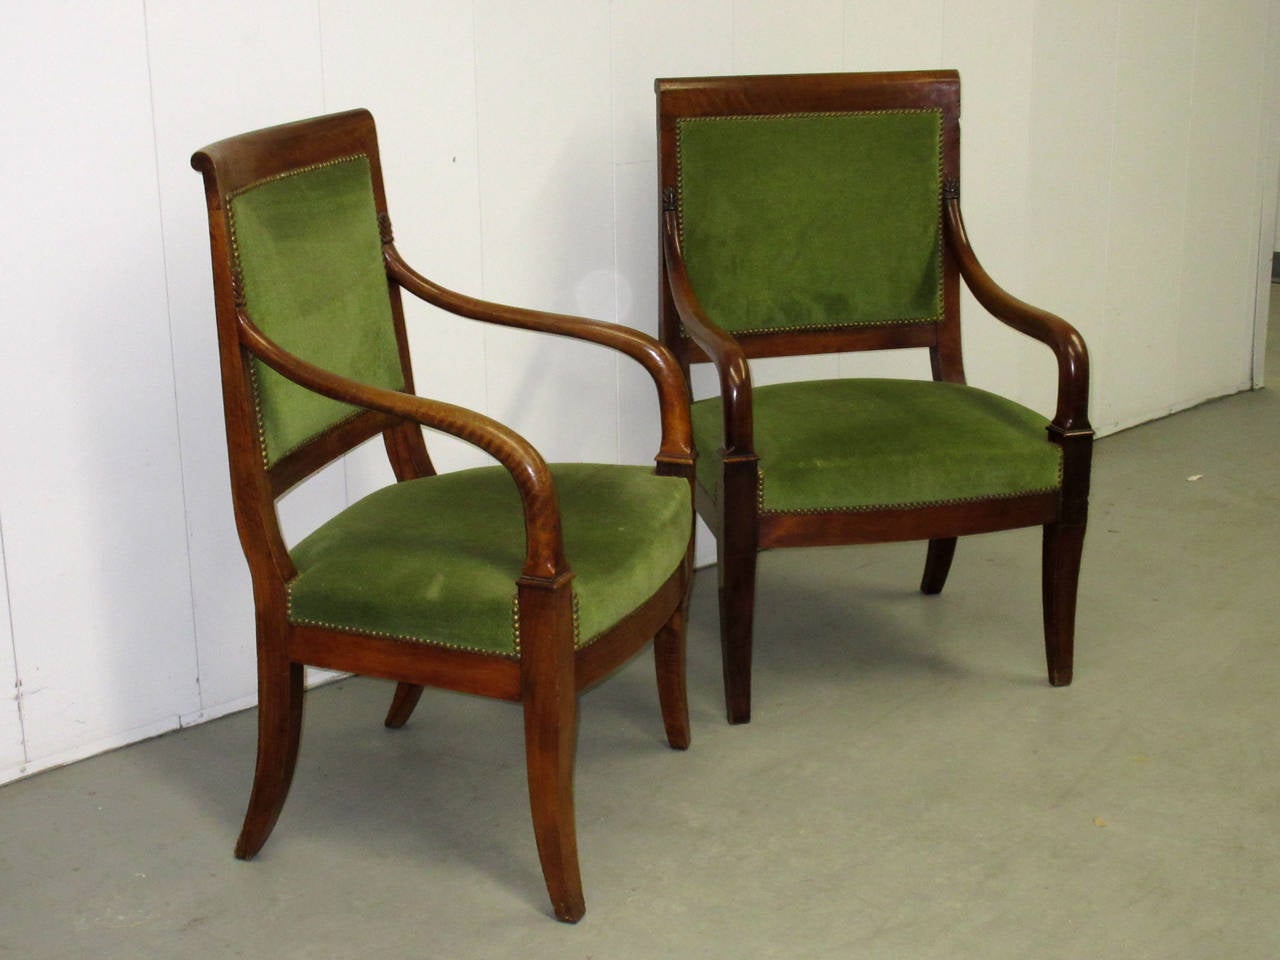 Early 19th Century armchairs of identical design. One chair is narrower with higher arms. Both are upholstered in green velvet and finished with brass nailheads.